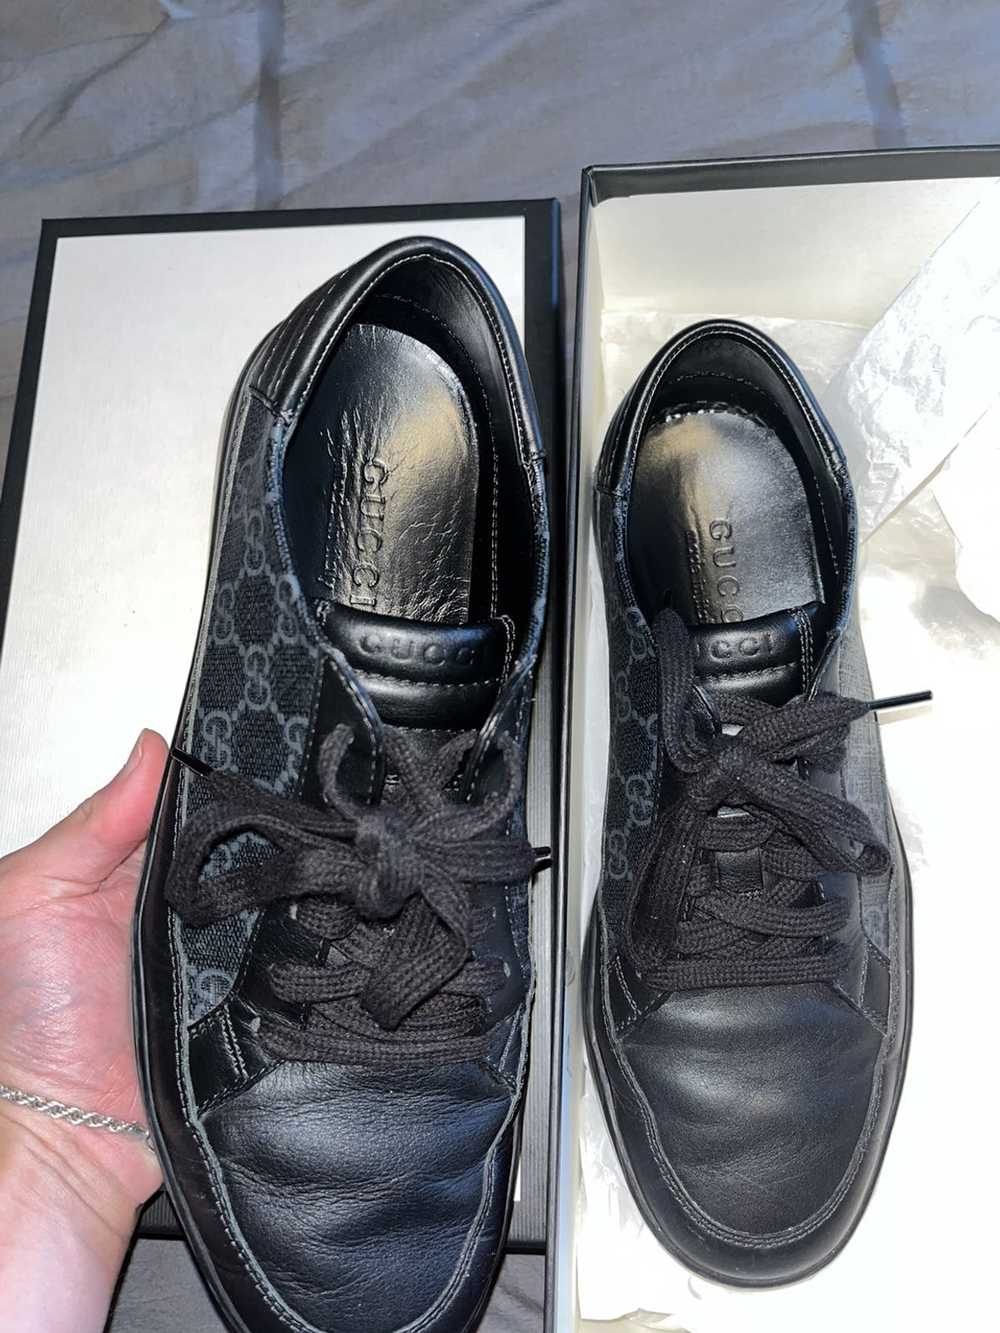 Gucci Gucci low top sneaker - image 3